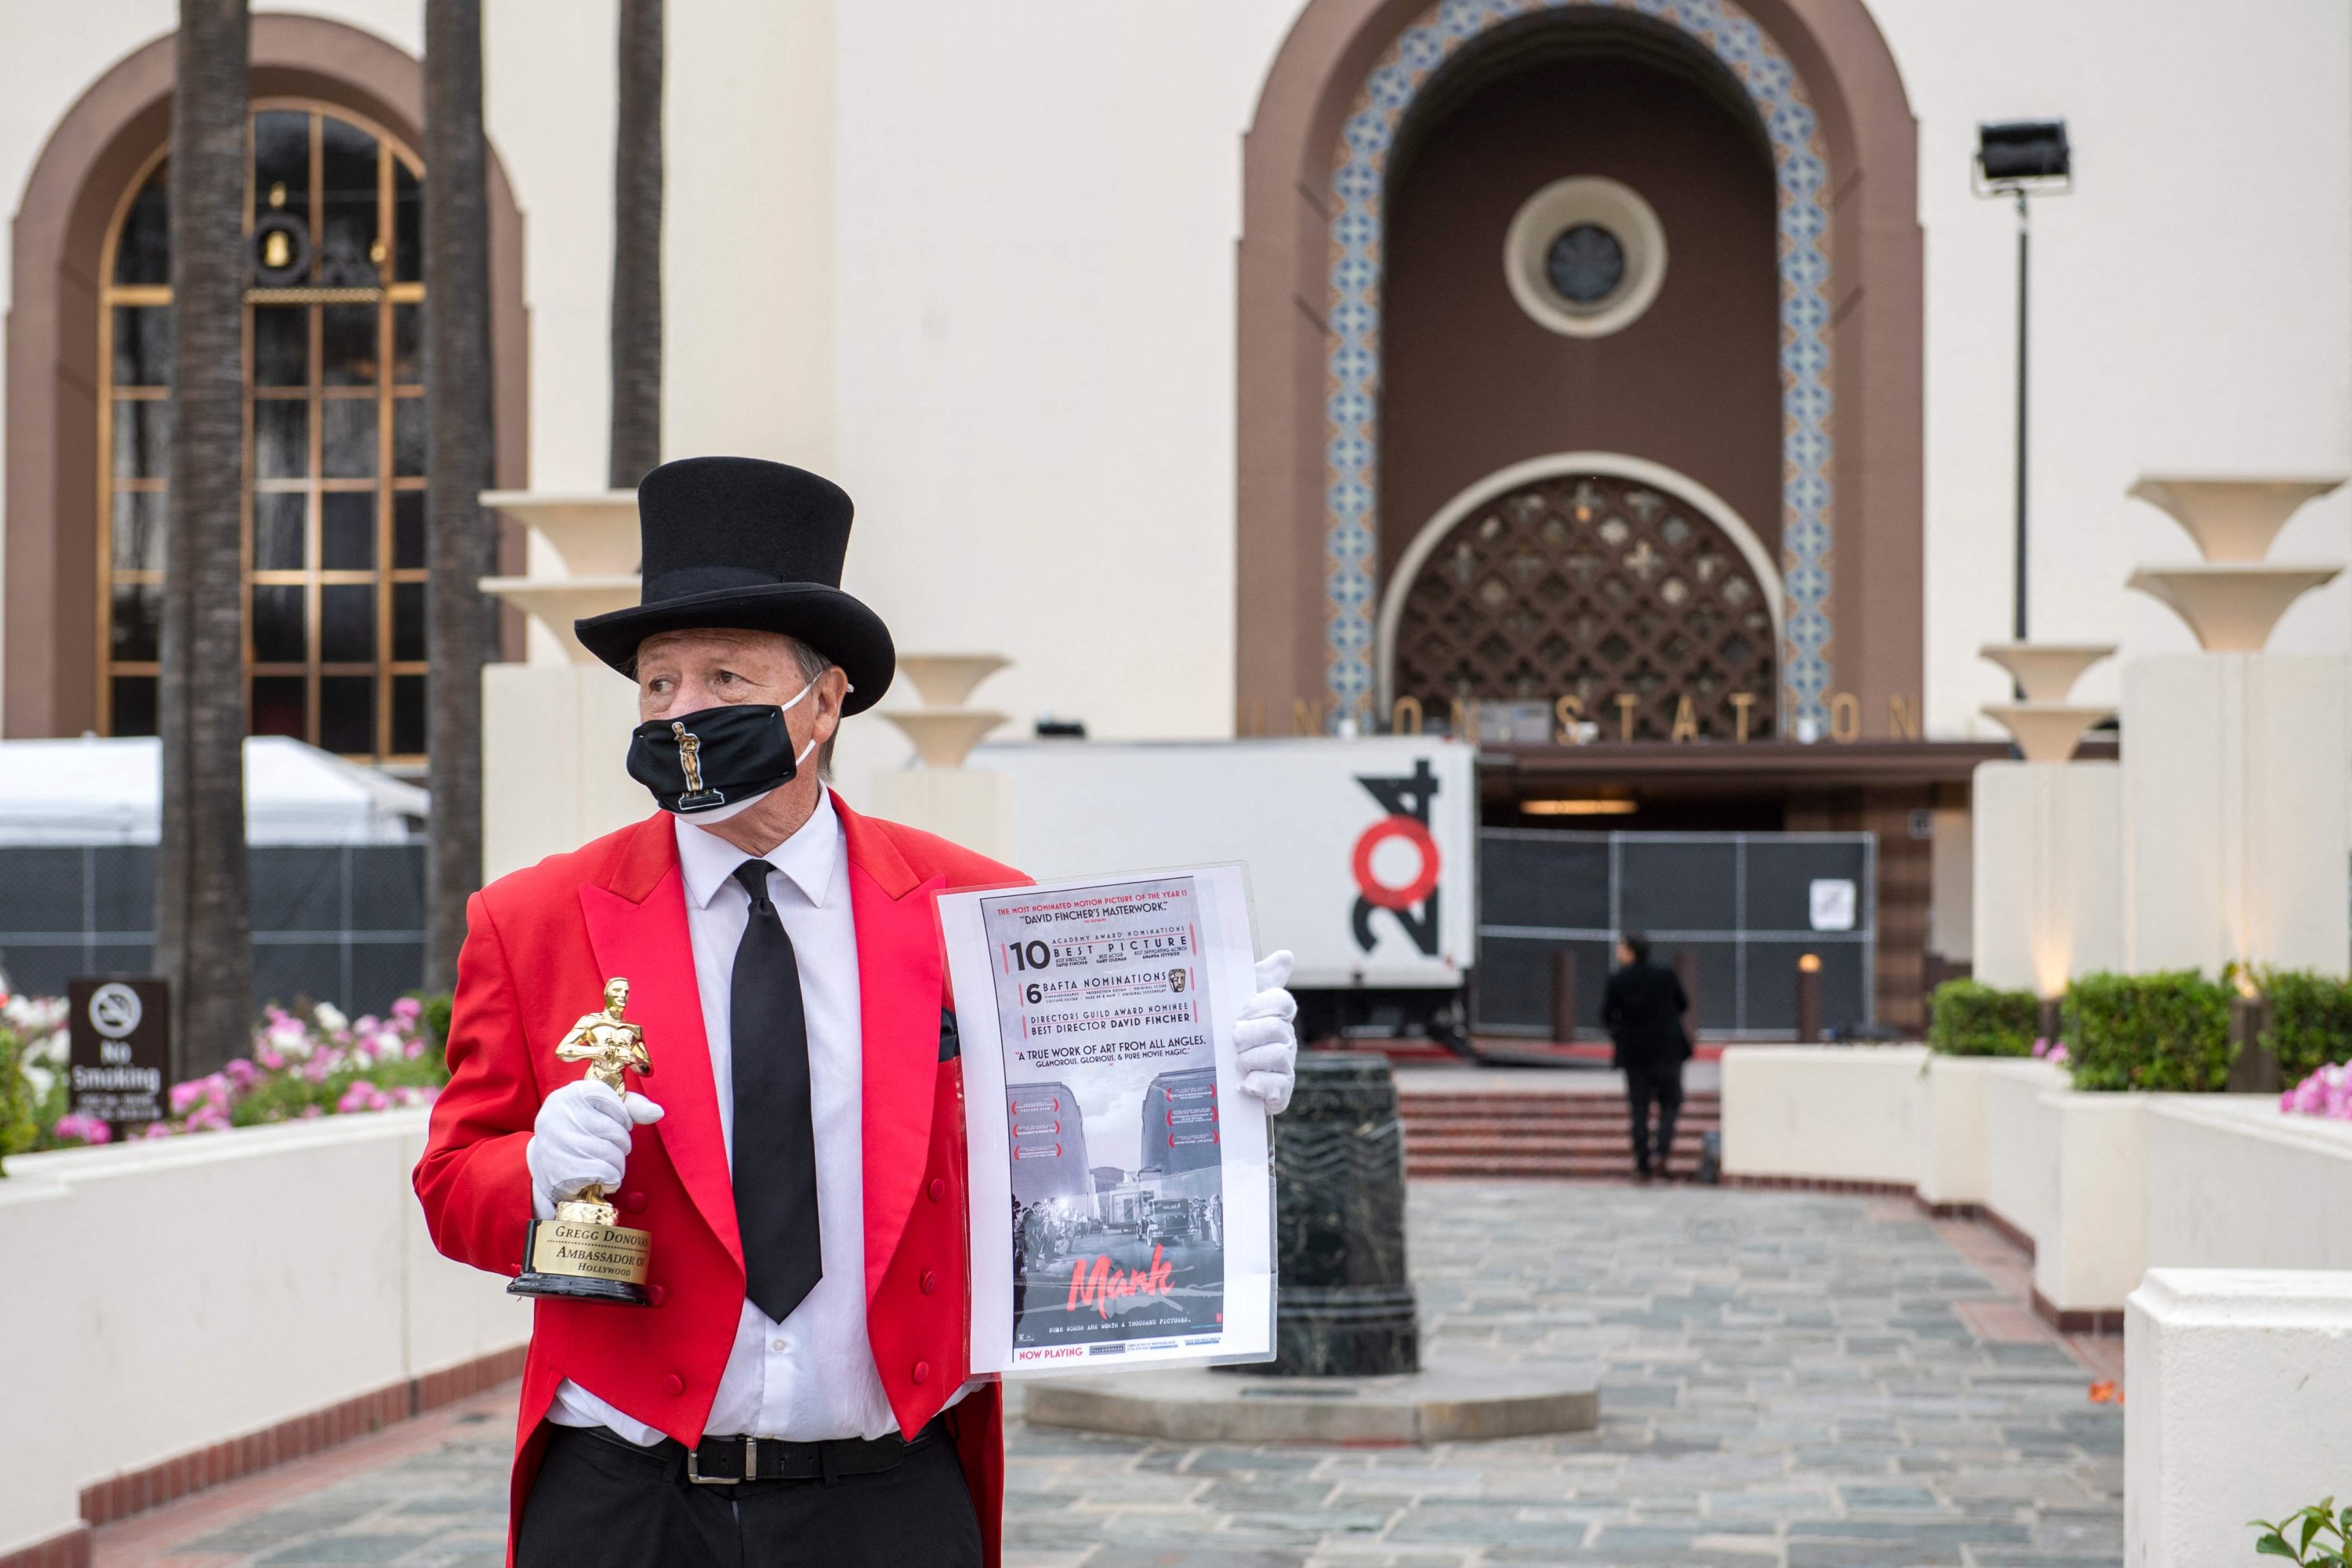 Gregg Donovan holds a fake Oscar statuette and a 'Mank' poster, during preparations for the 93rd Academy Awards, in front of Union Station in Los Angeles, California, U.S., April 23, 2021. (AFP Photo)